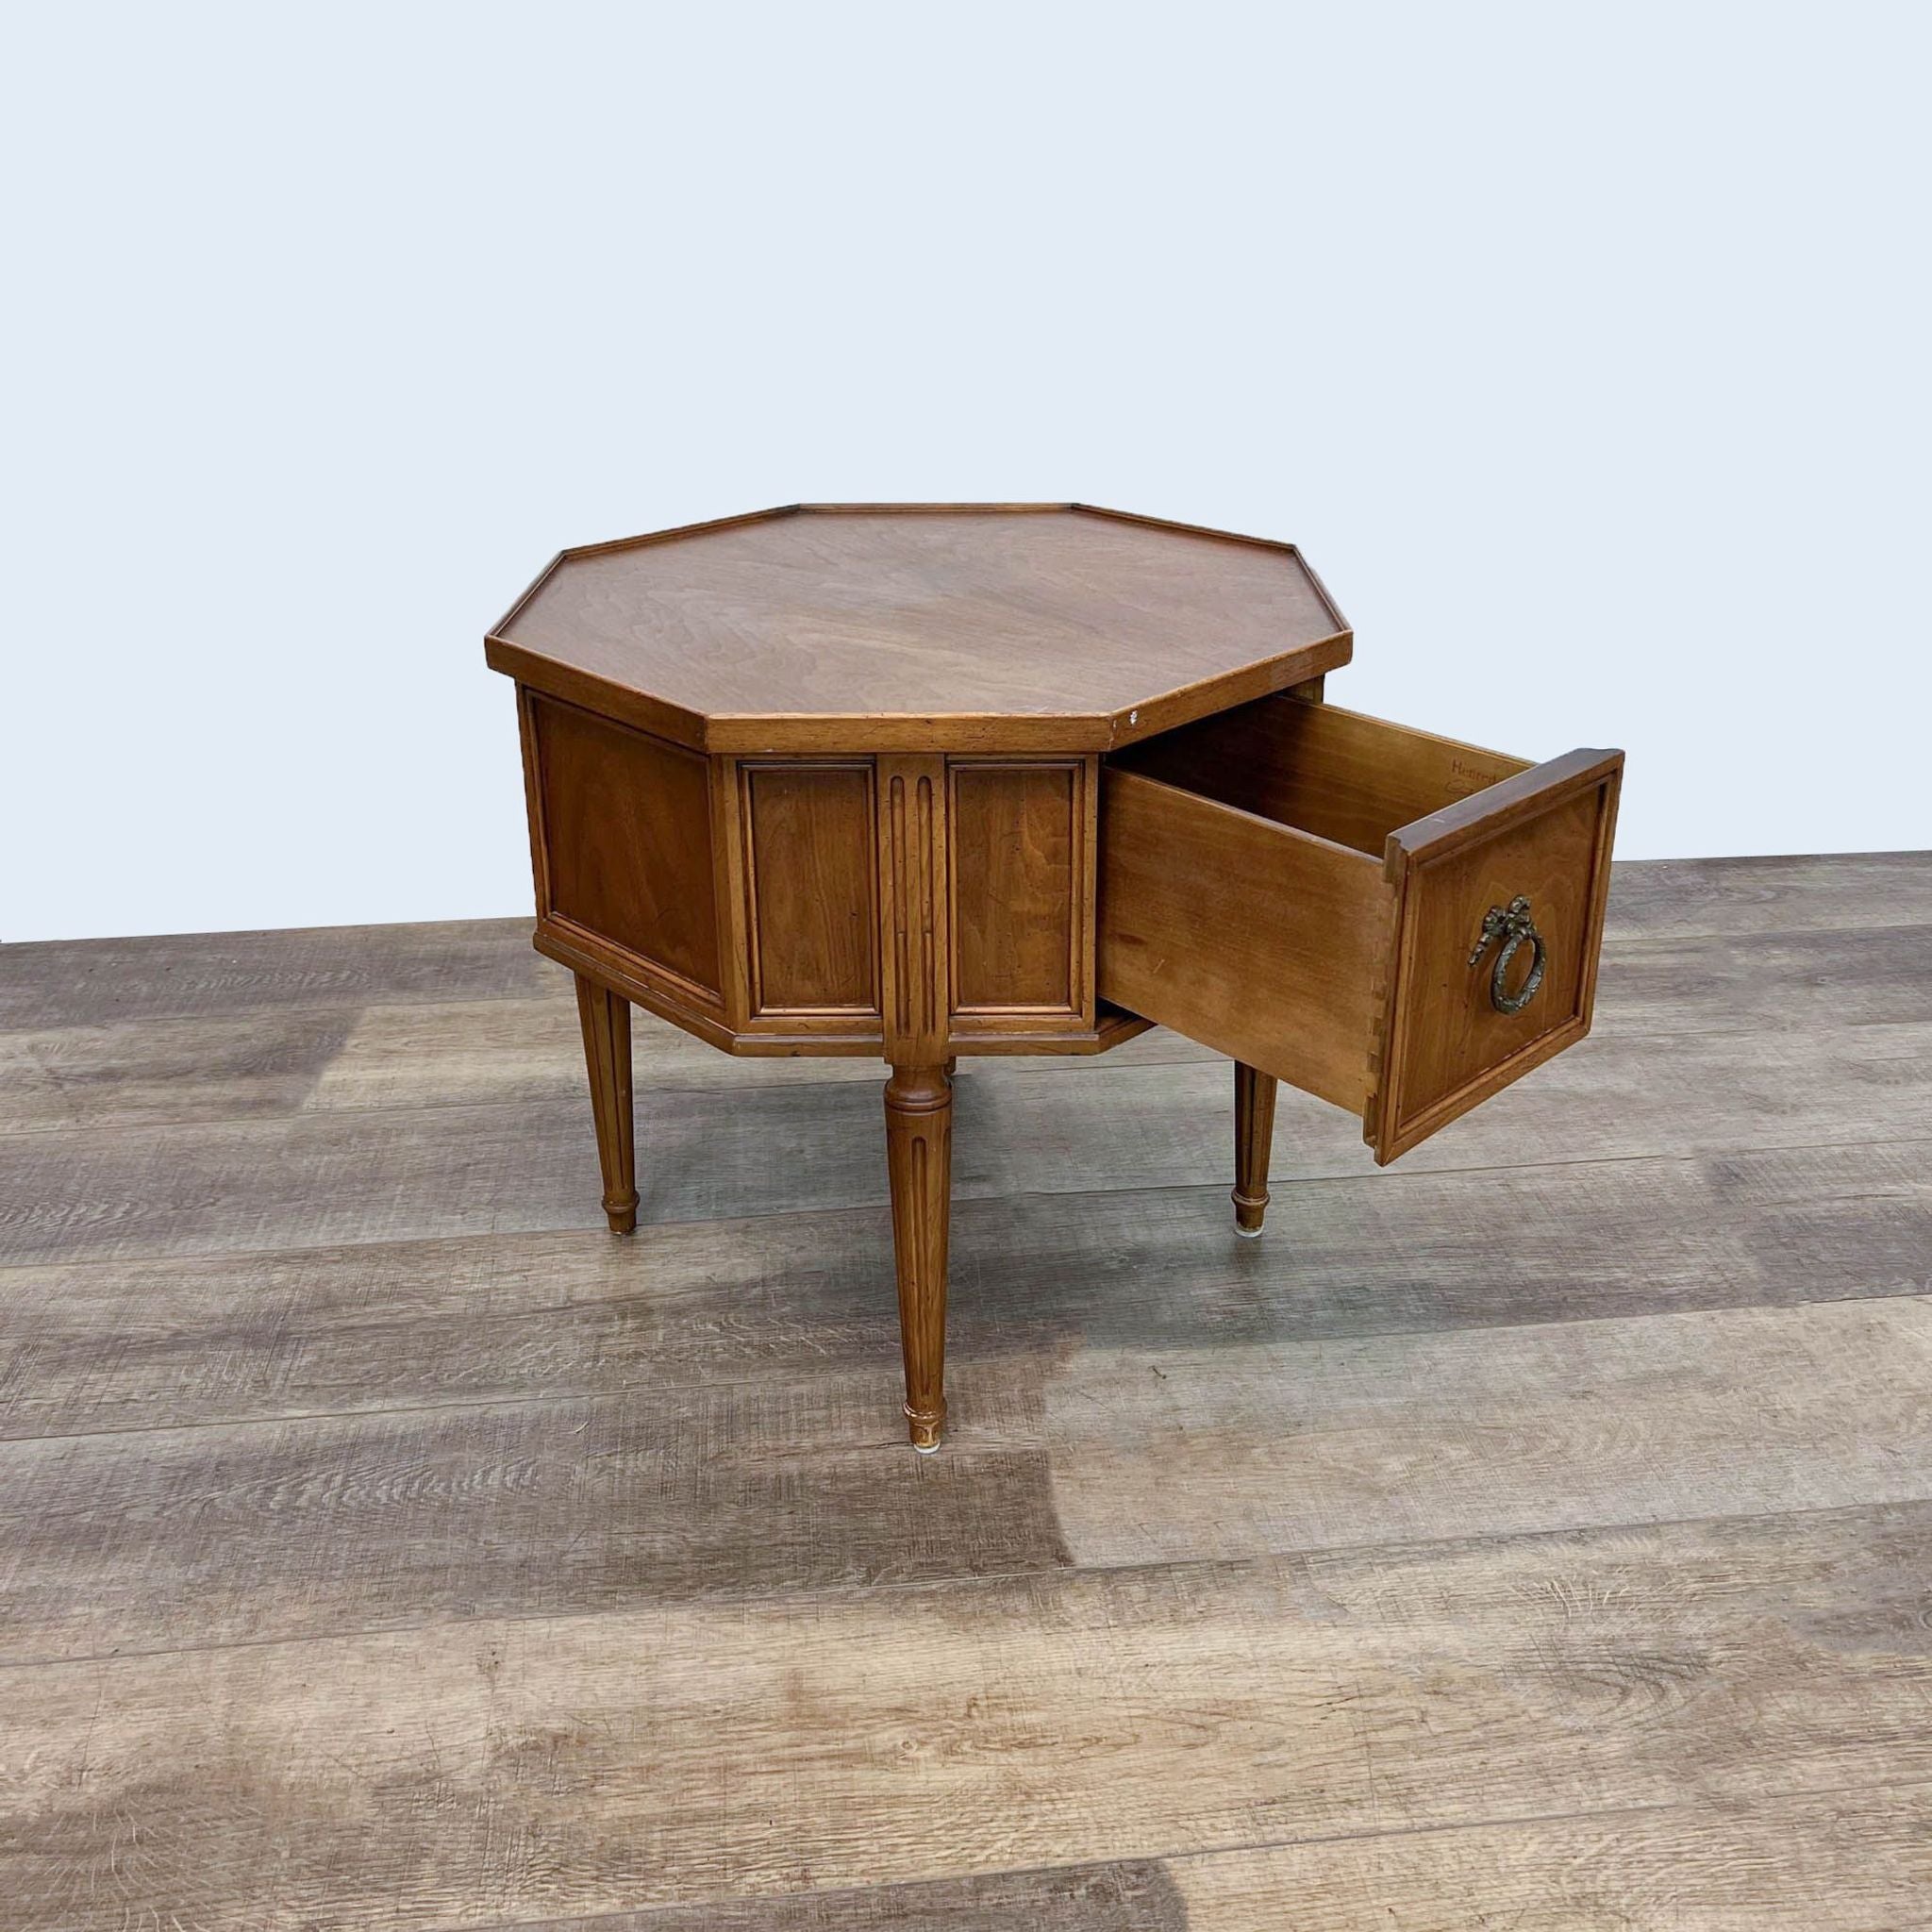 Reperch brand octagonal end table with an open drawer revealing storage space, made of wood with antique-style hardware.